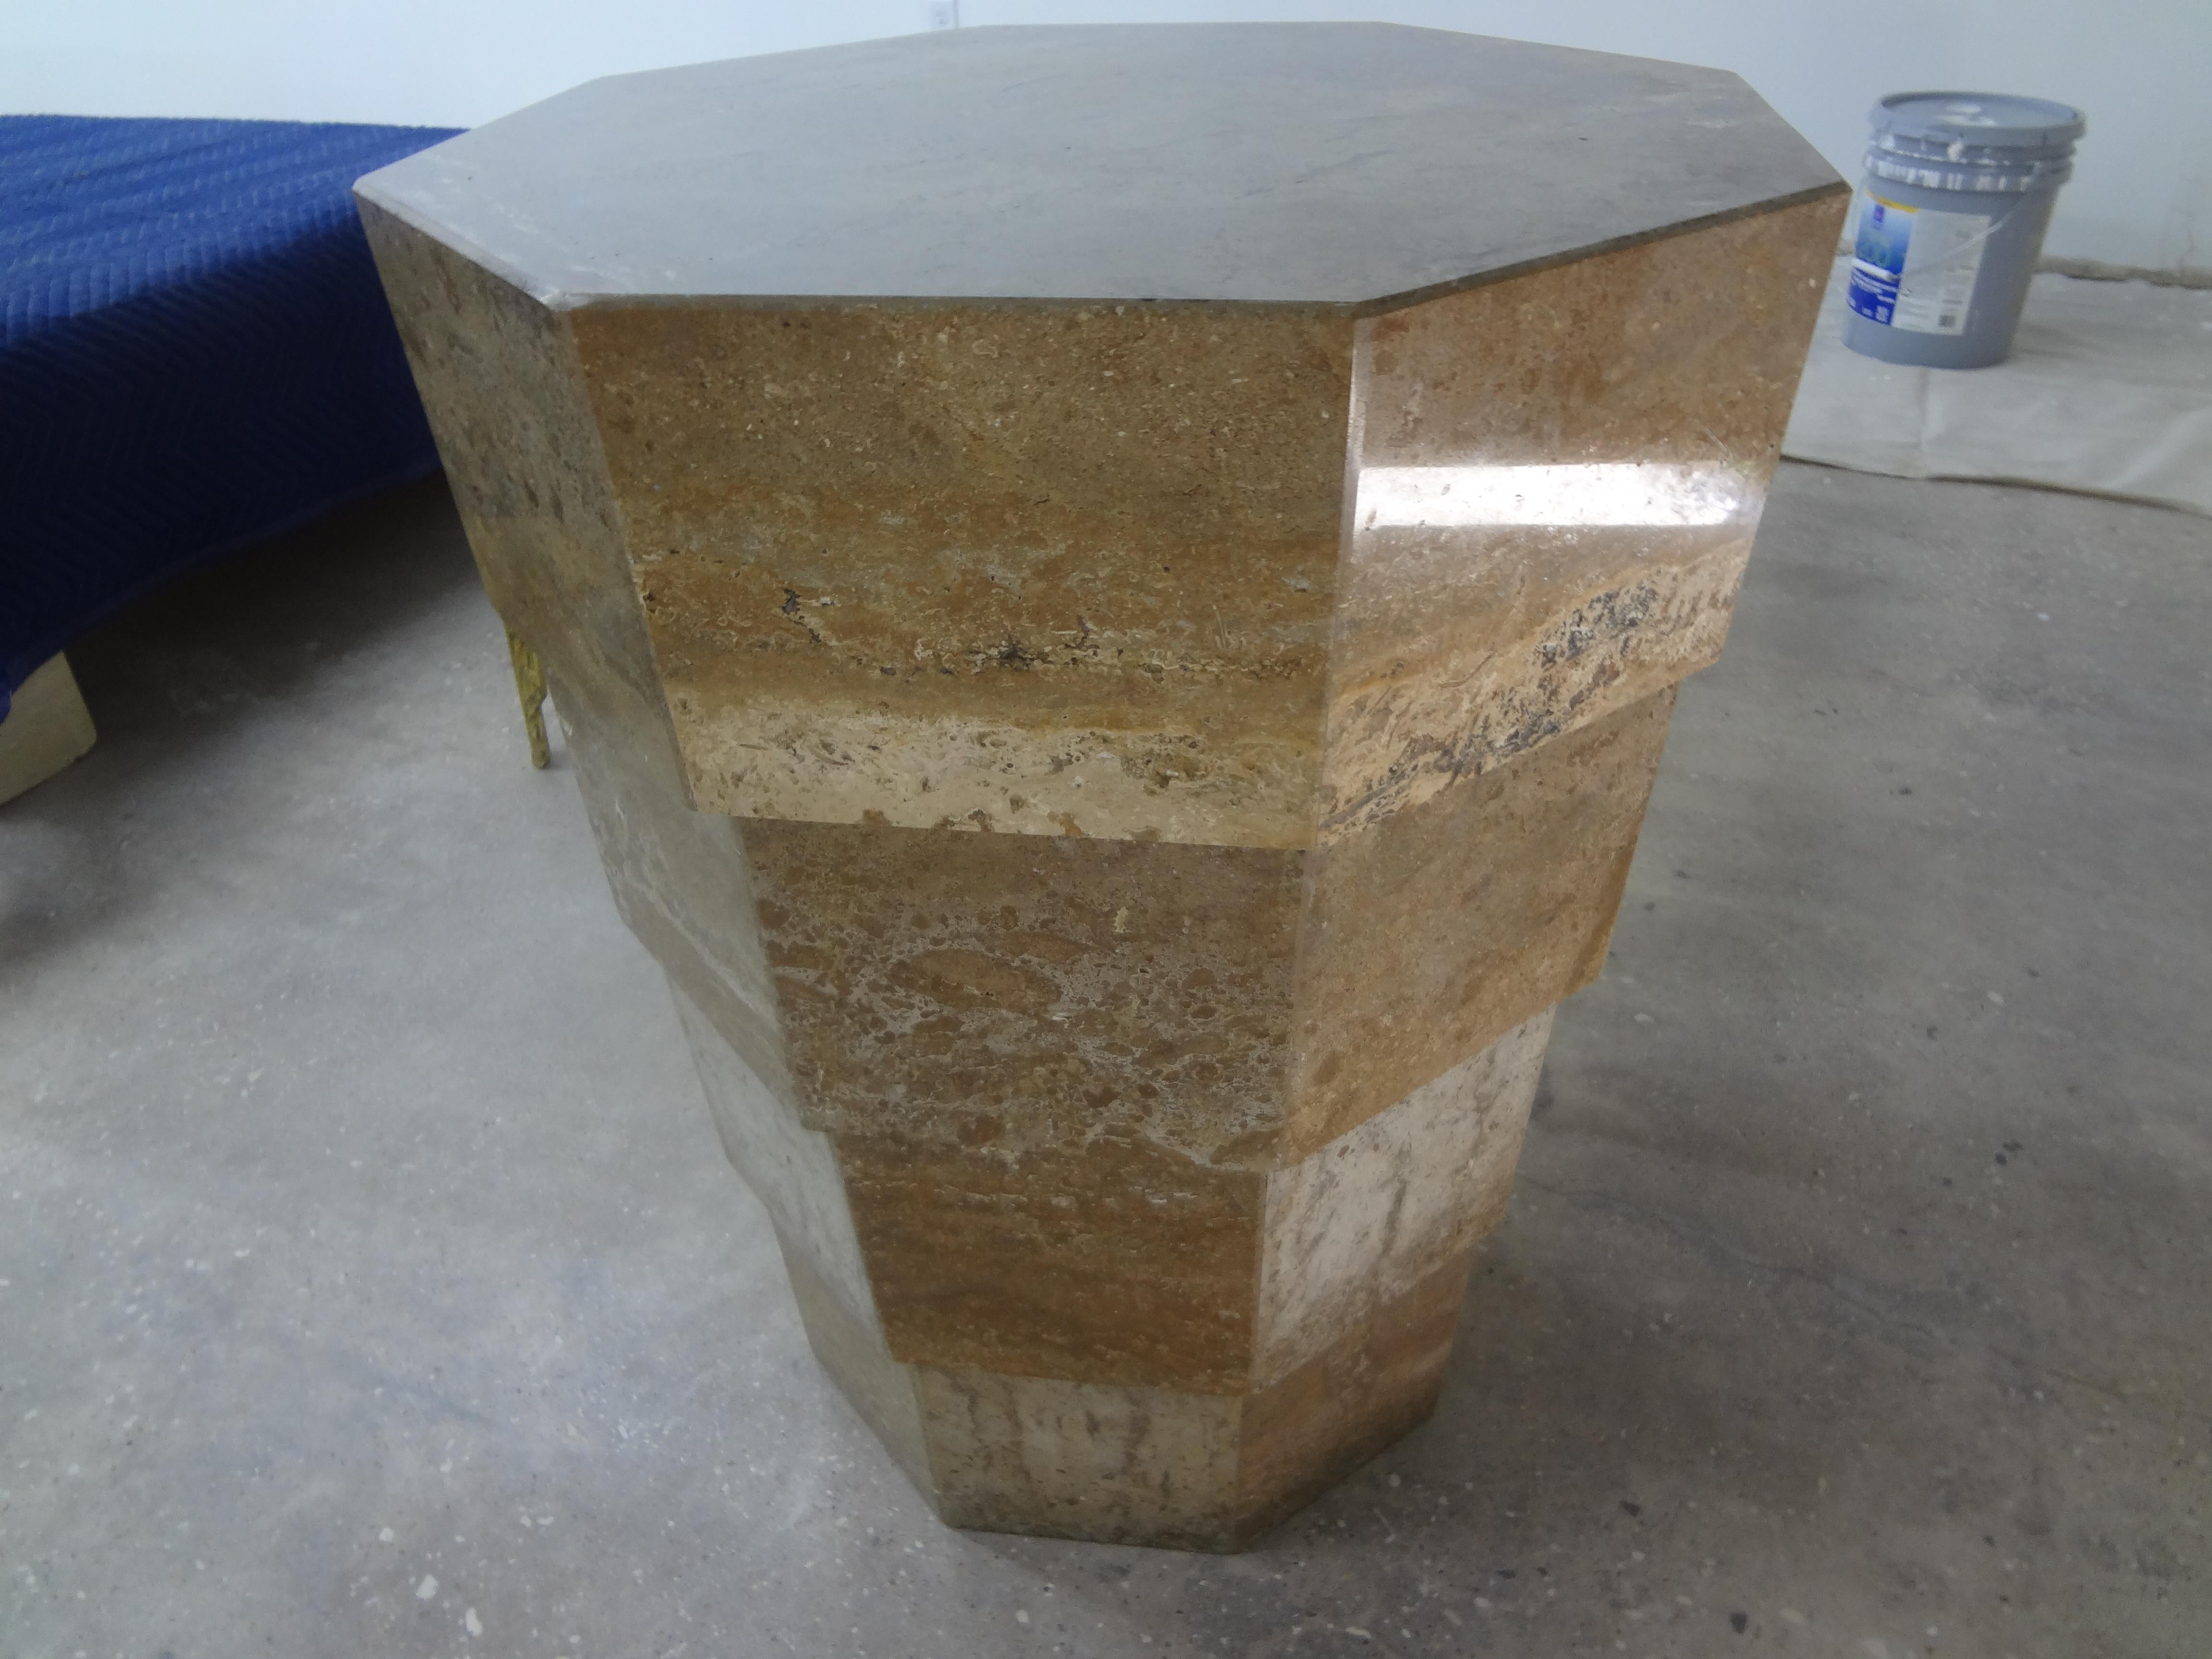 Italian modern stepped Travertine pedestal or table base after Angelo Mangiarotti.
Beautiful Italian Angelo Mangiarotti style travertine pedestal, console, center table or dining table base consisting of an inverted stack of travertine 